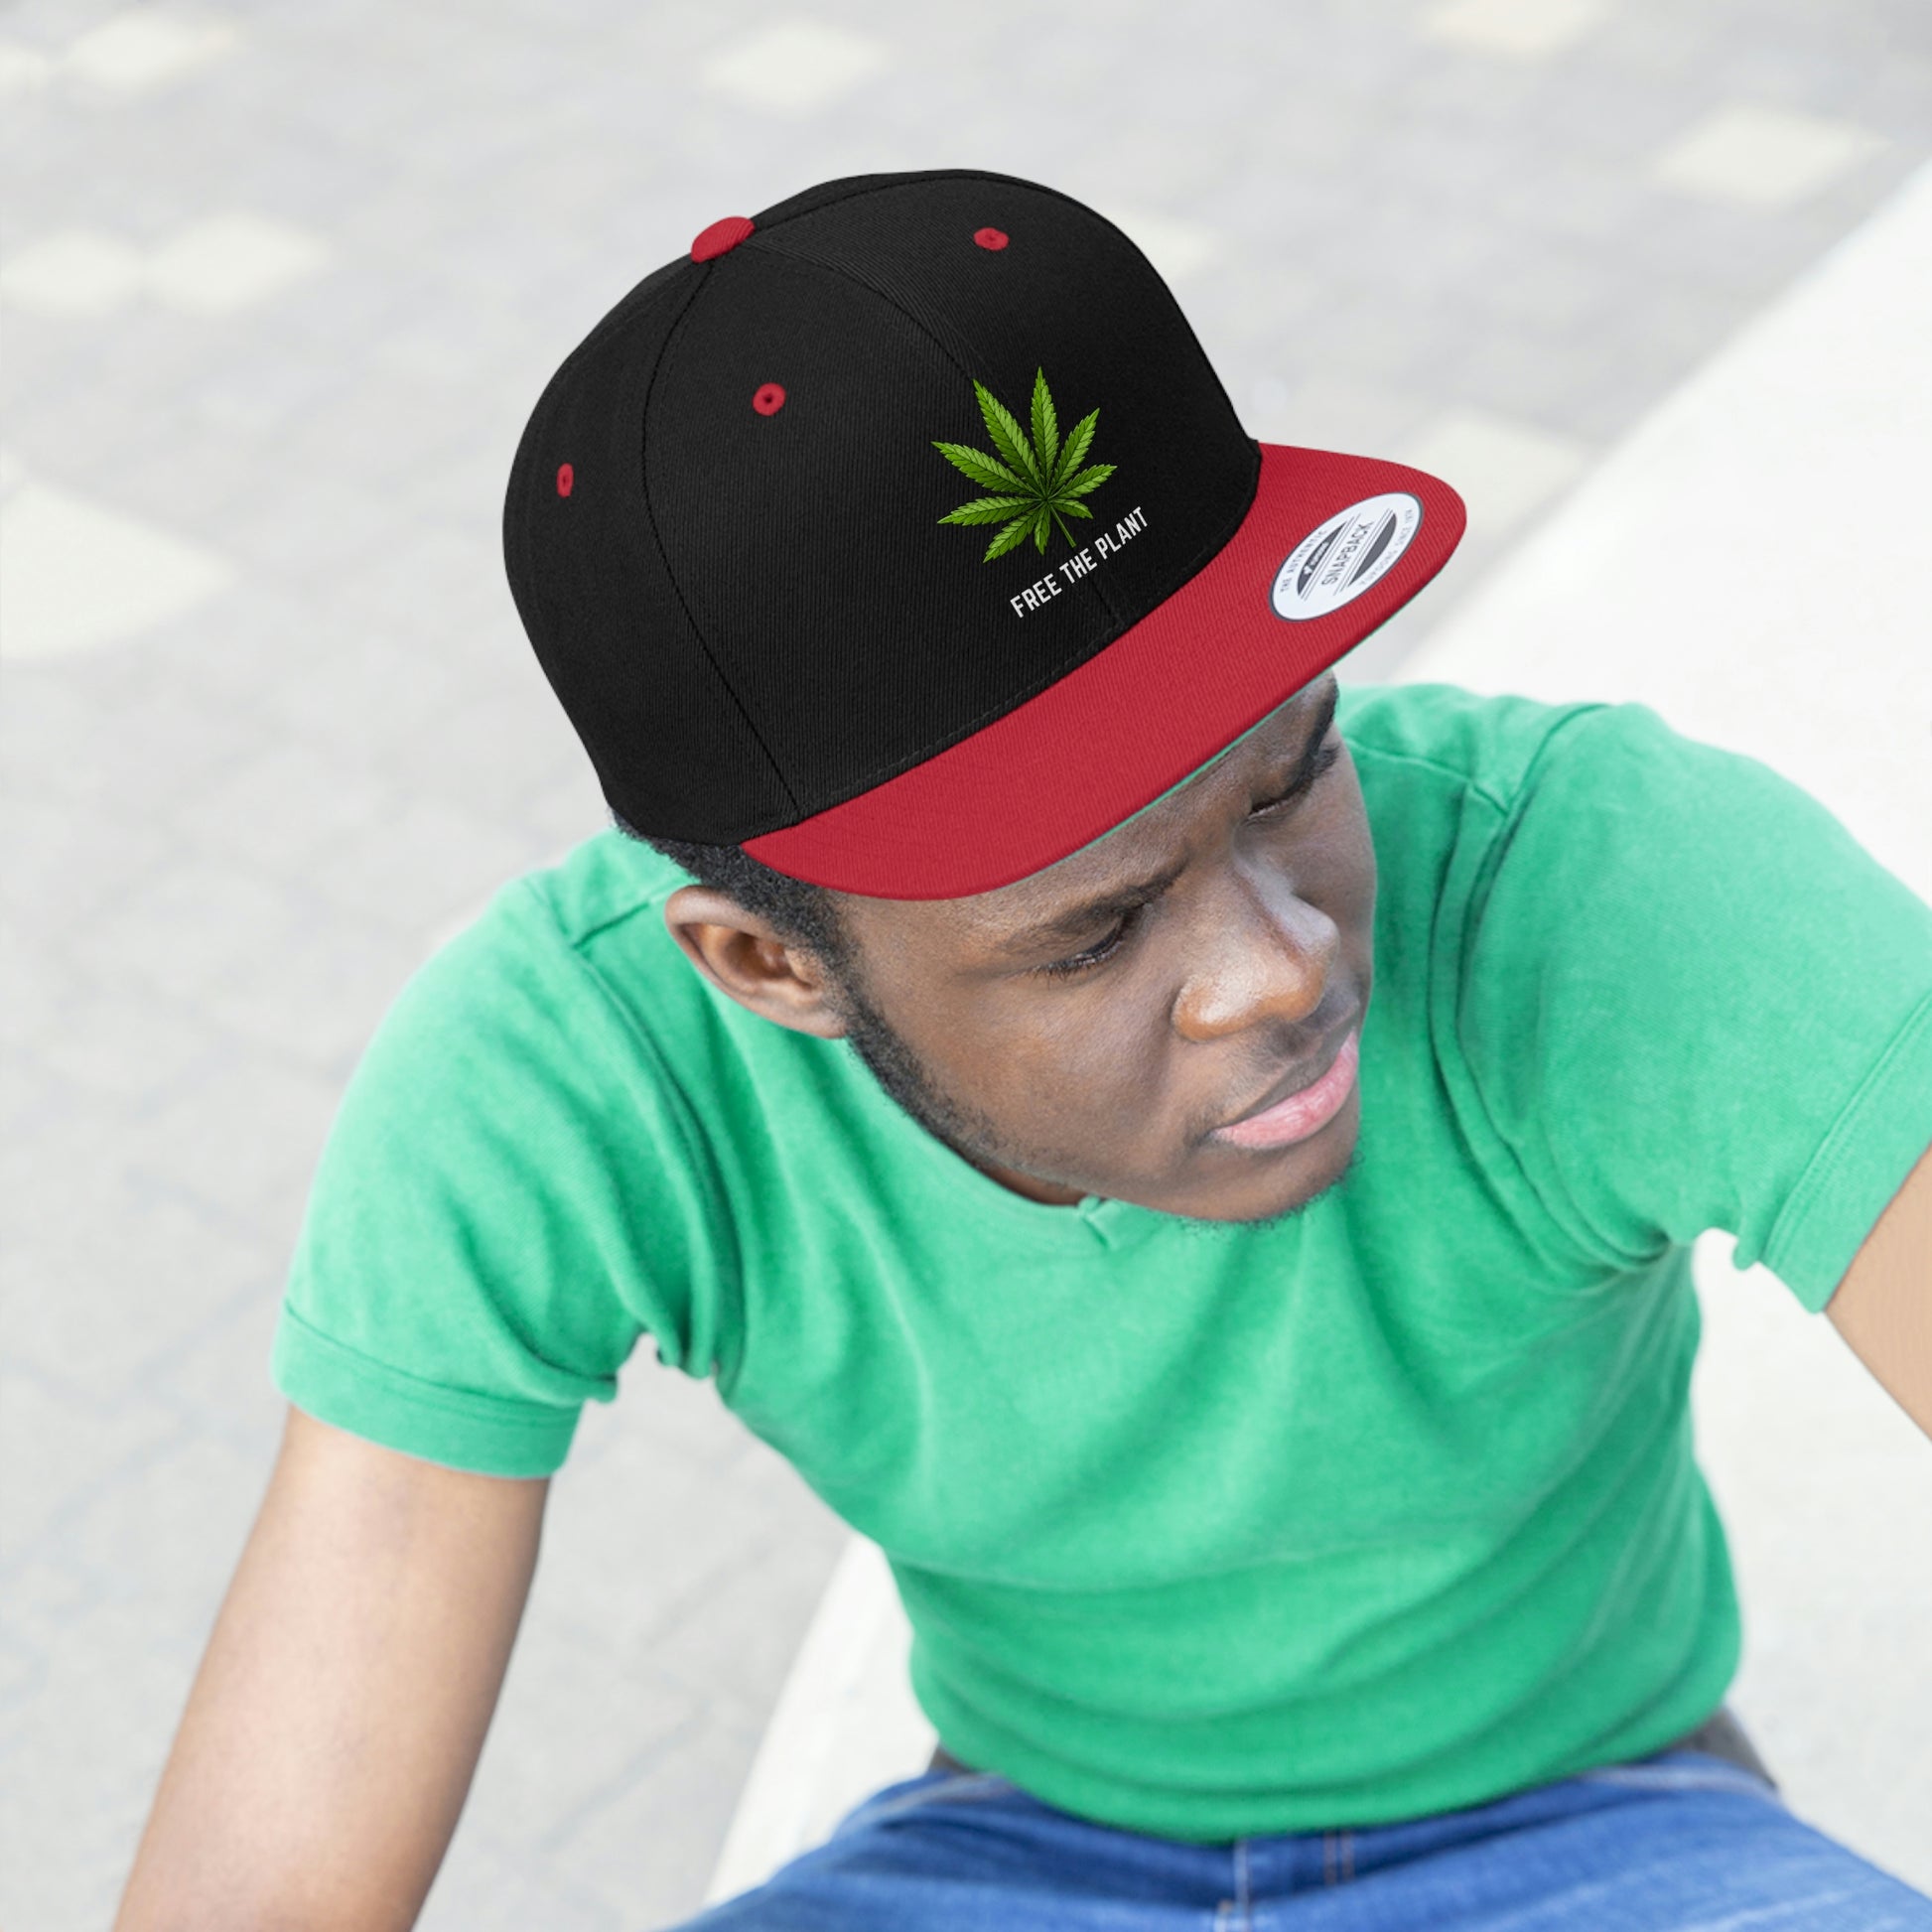 A young man looks cool with the red and black Free The Plant Snapback Hat with green a cannabis leaf a green underbill and a matching green t-shirt